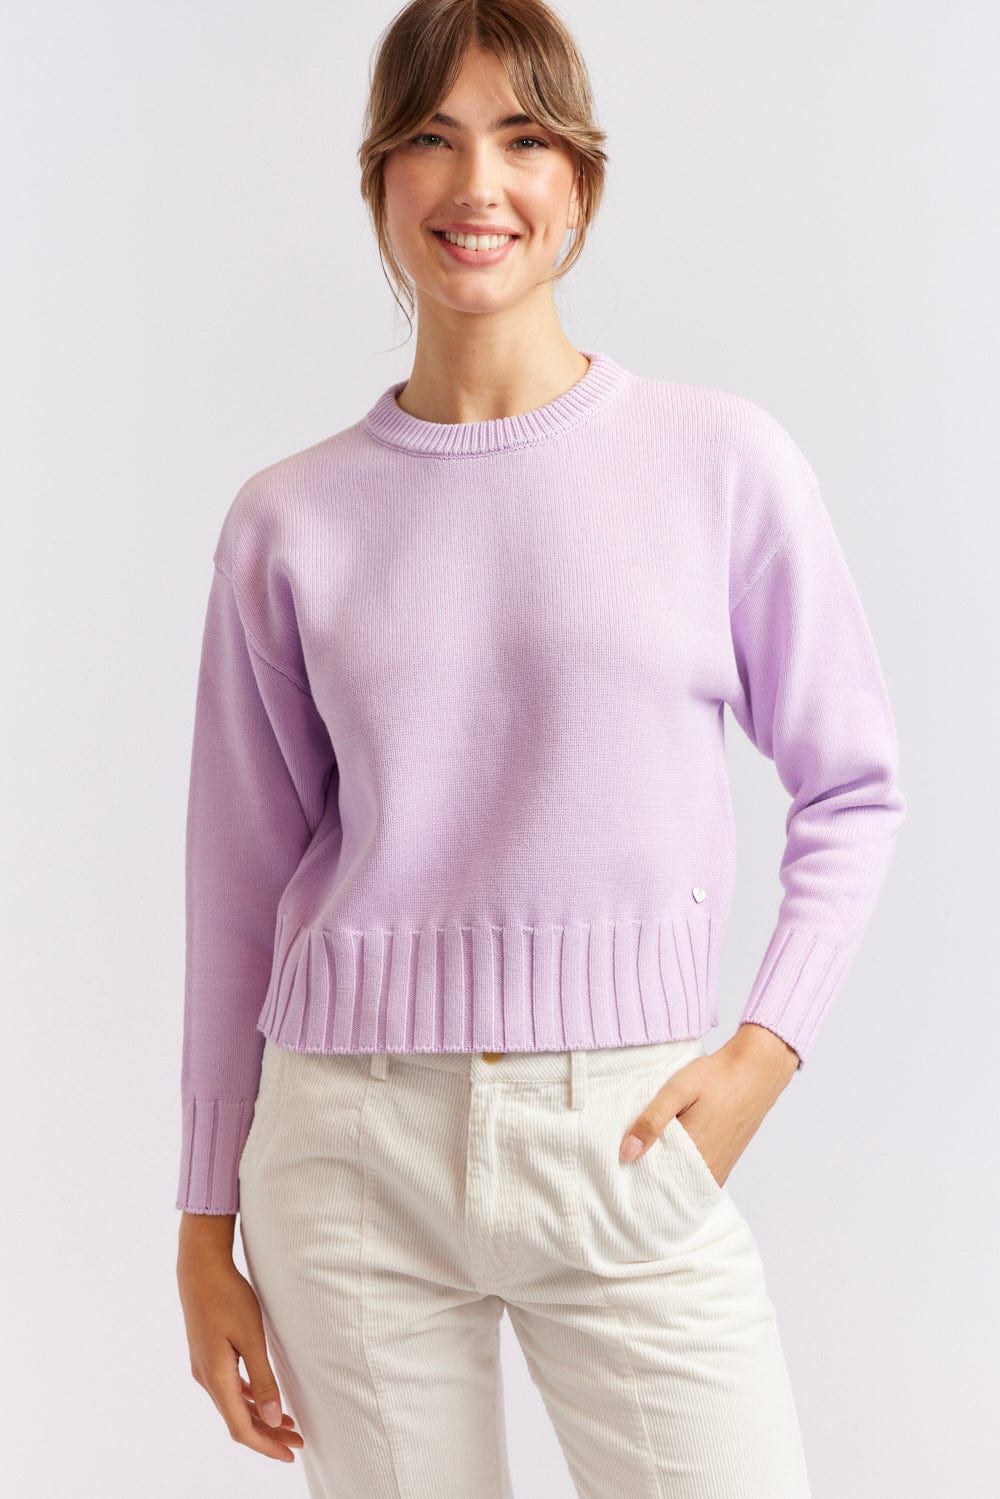 Alessandra Tootsie Cotton Sweater in Hyacinth Lilac